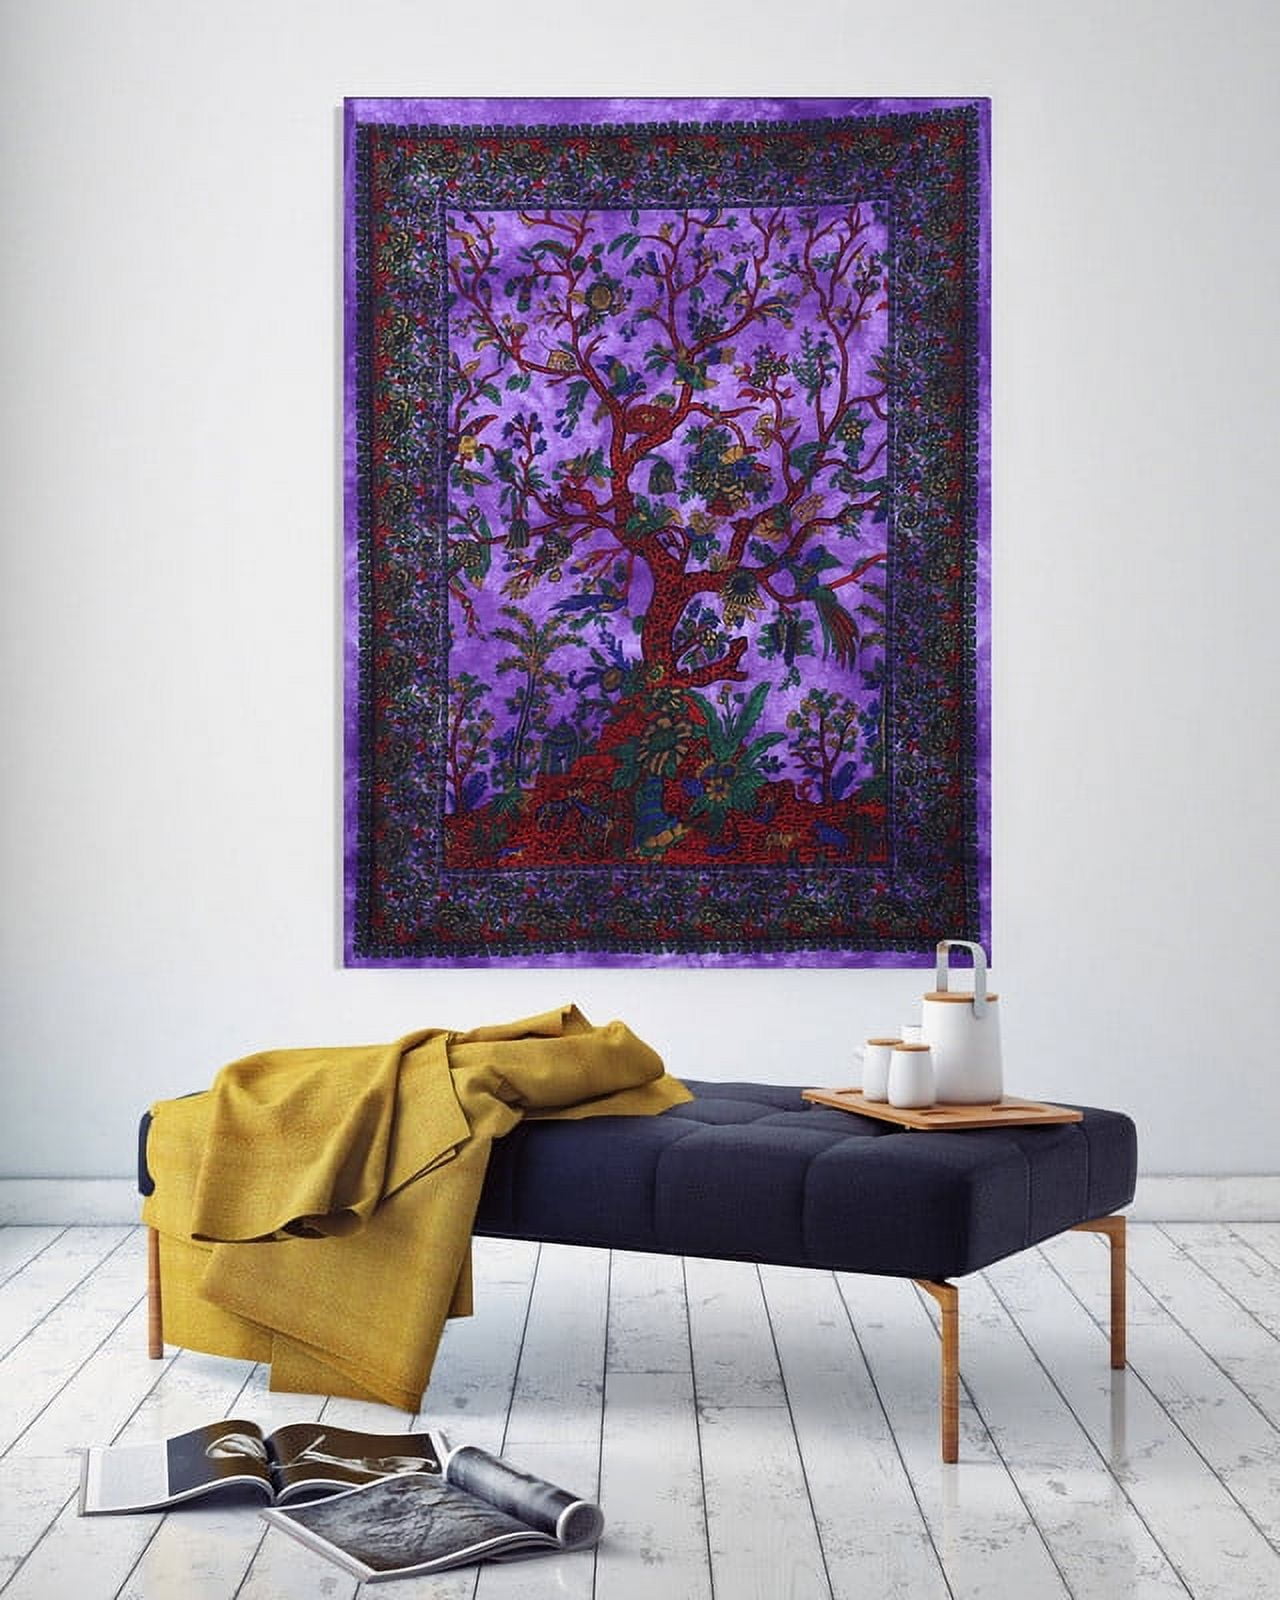 UNZYE Tapestries in Bulk Large Wall Tapestry Nature Fish Tapestries Indie  Tapestry Wall Hanging Kit Blue Wall Hanging Blanket Fabric Art Decorations